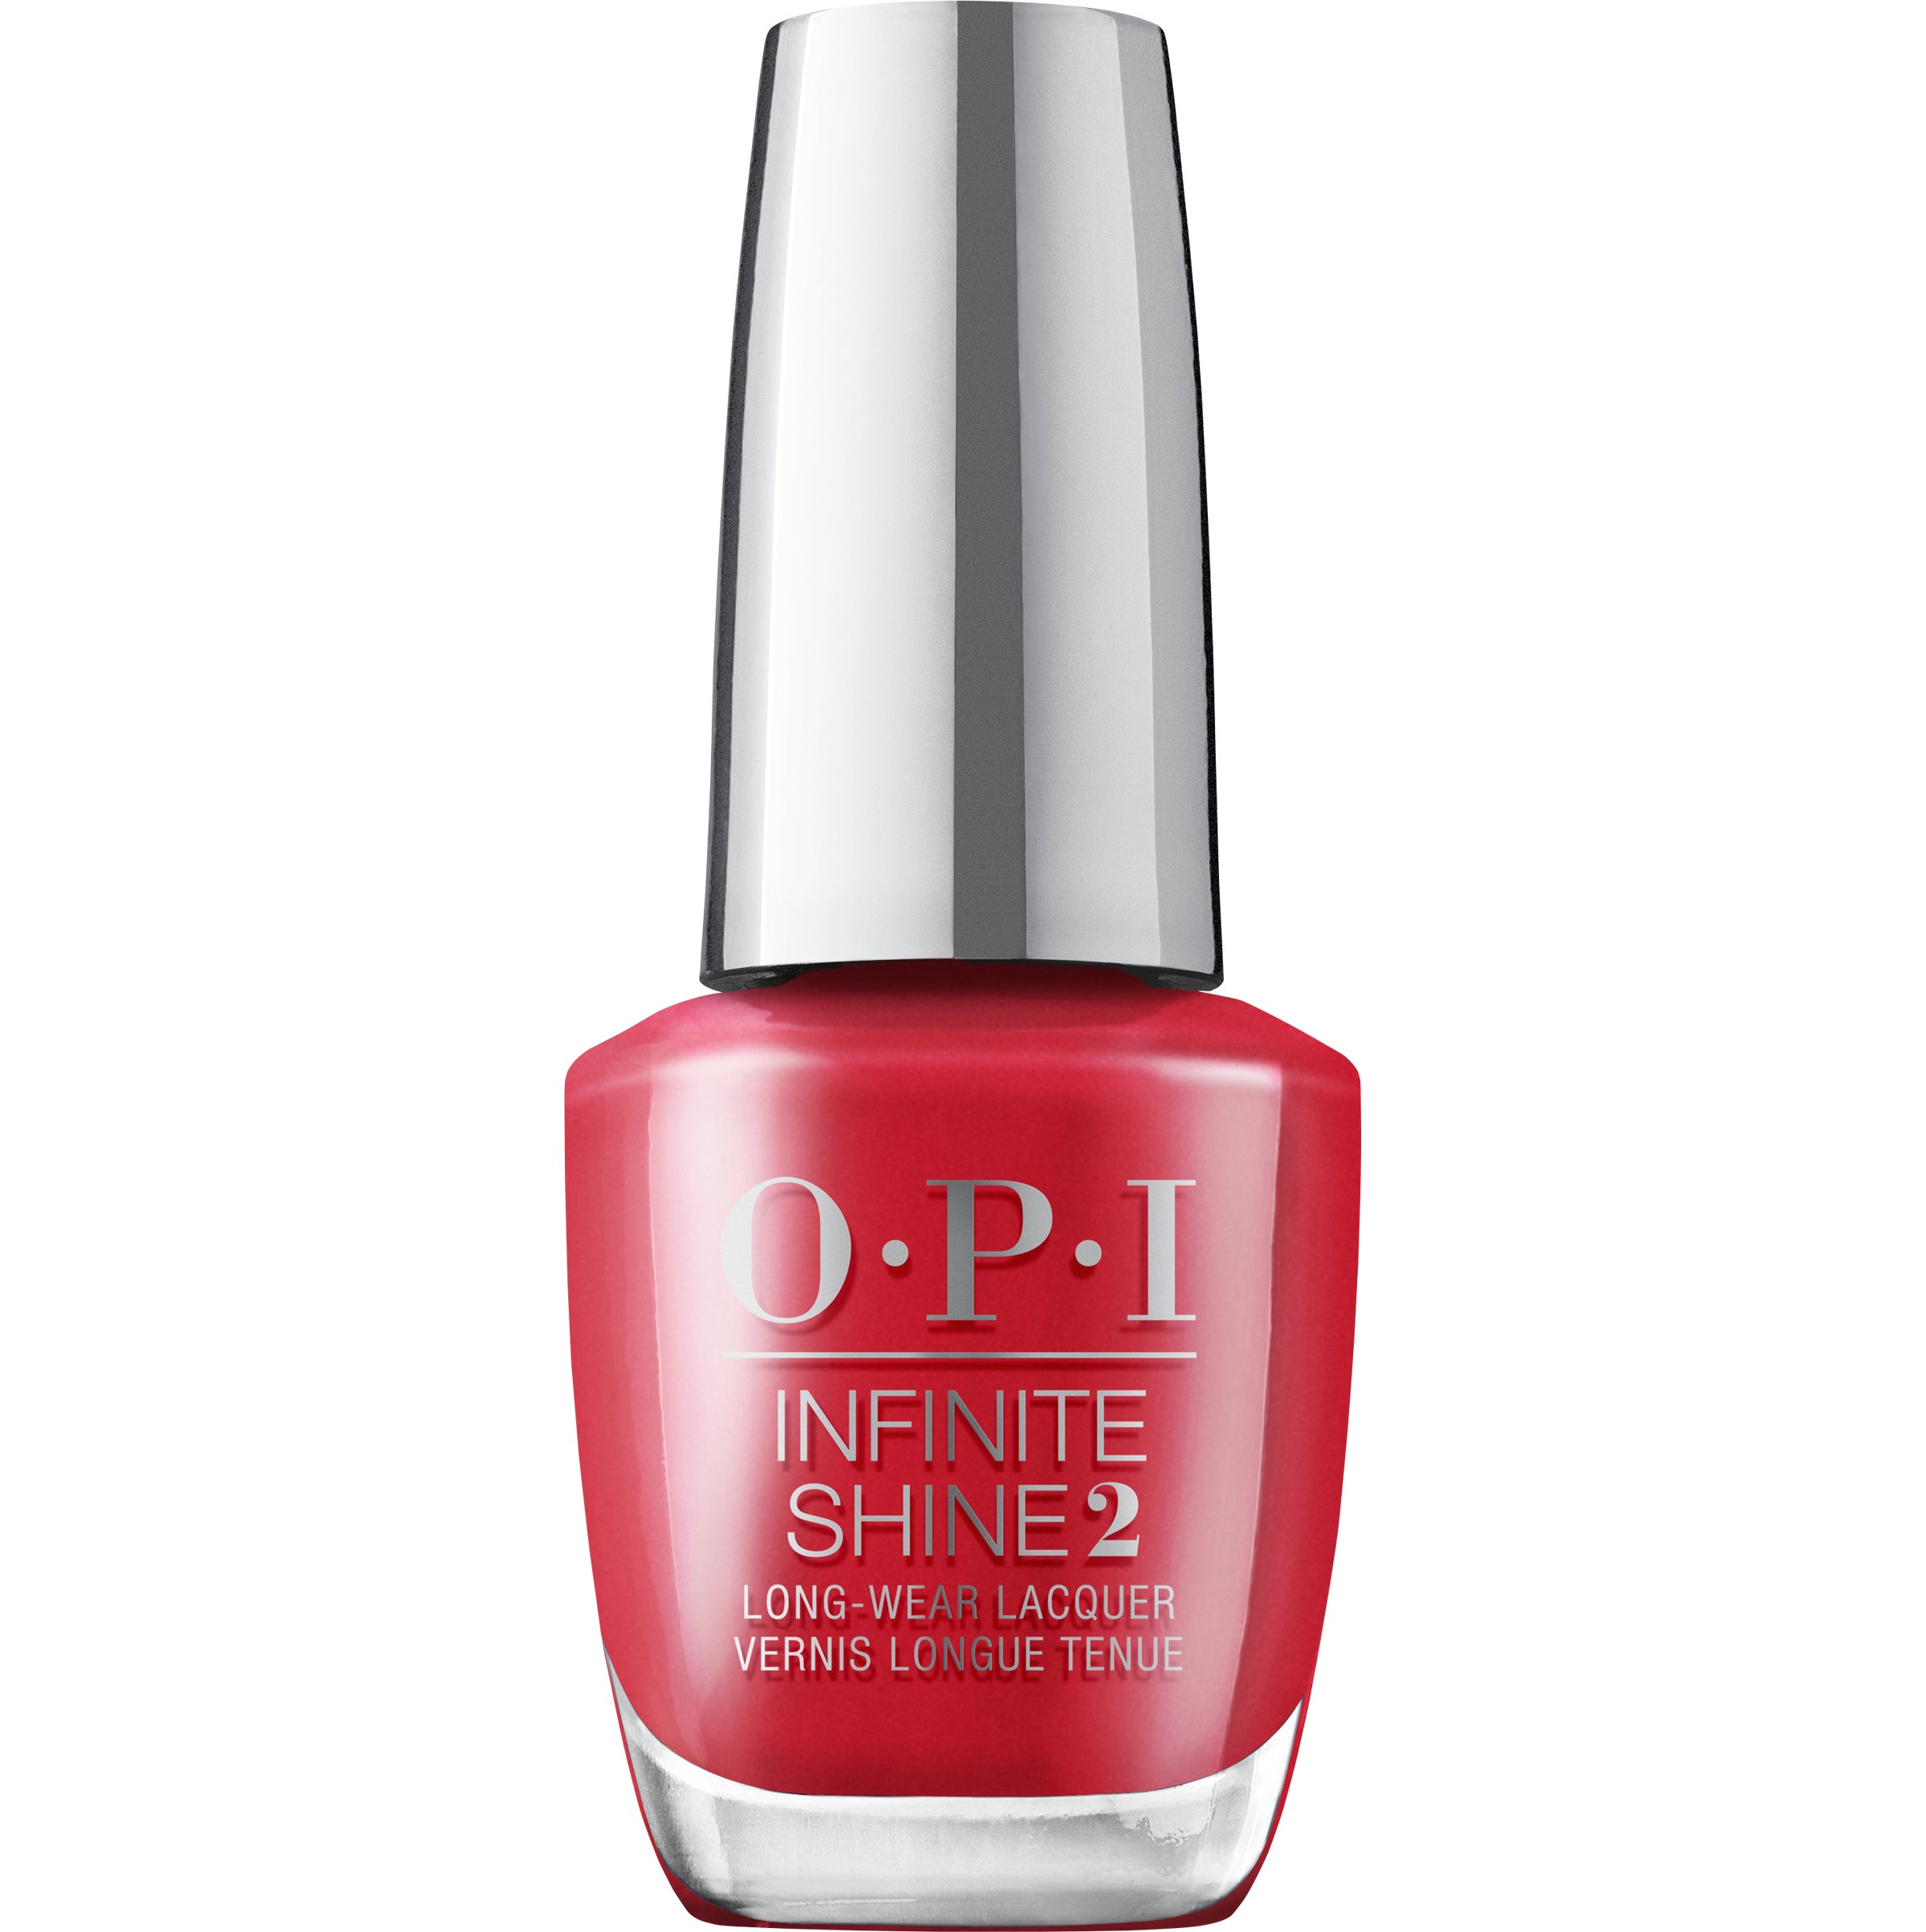 OPI Emmy, Have You Seen Oscar? Infinite Shine Long-Wear Lacquer